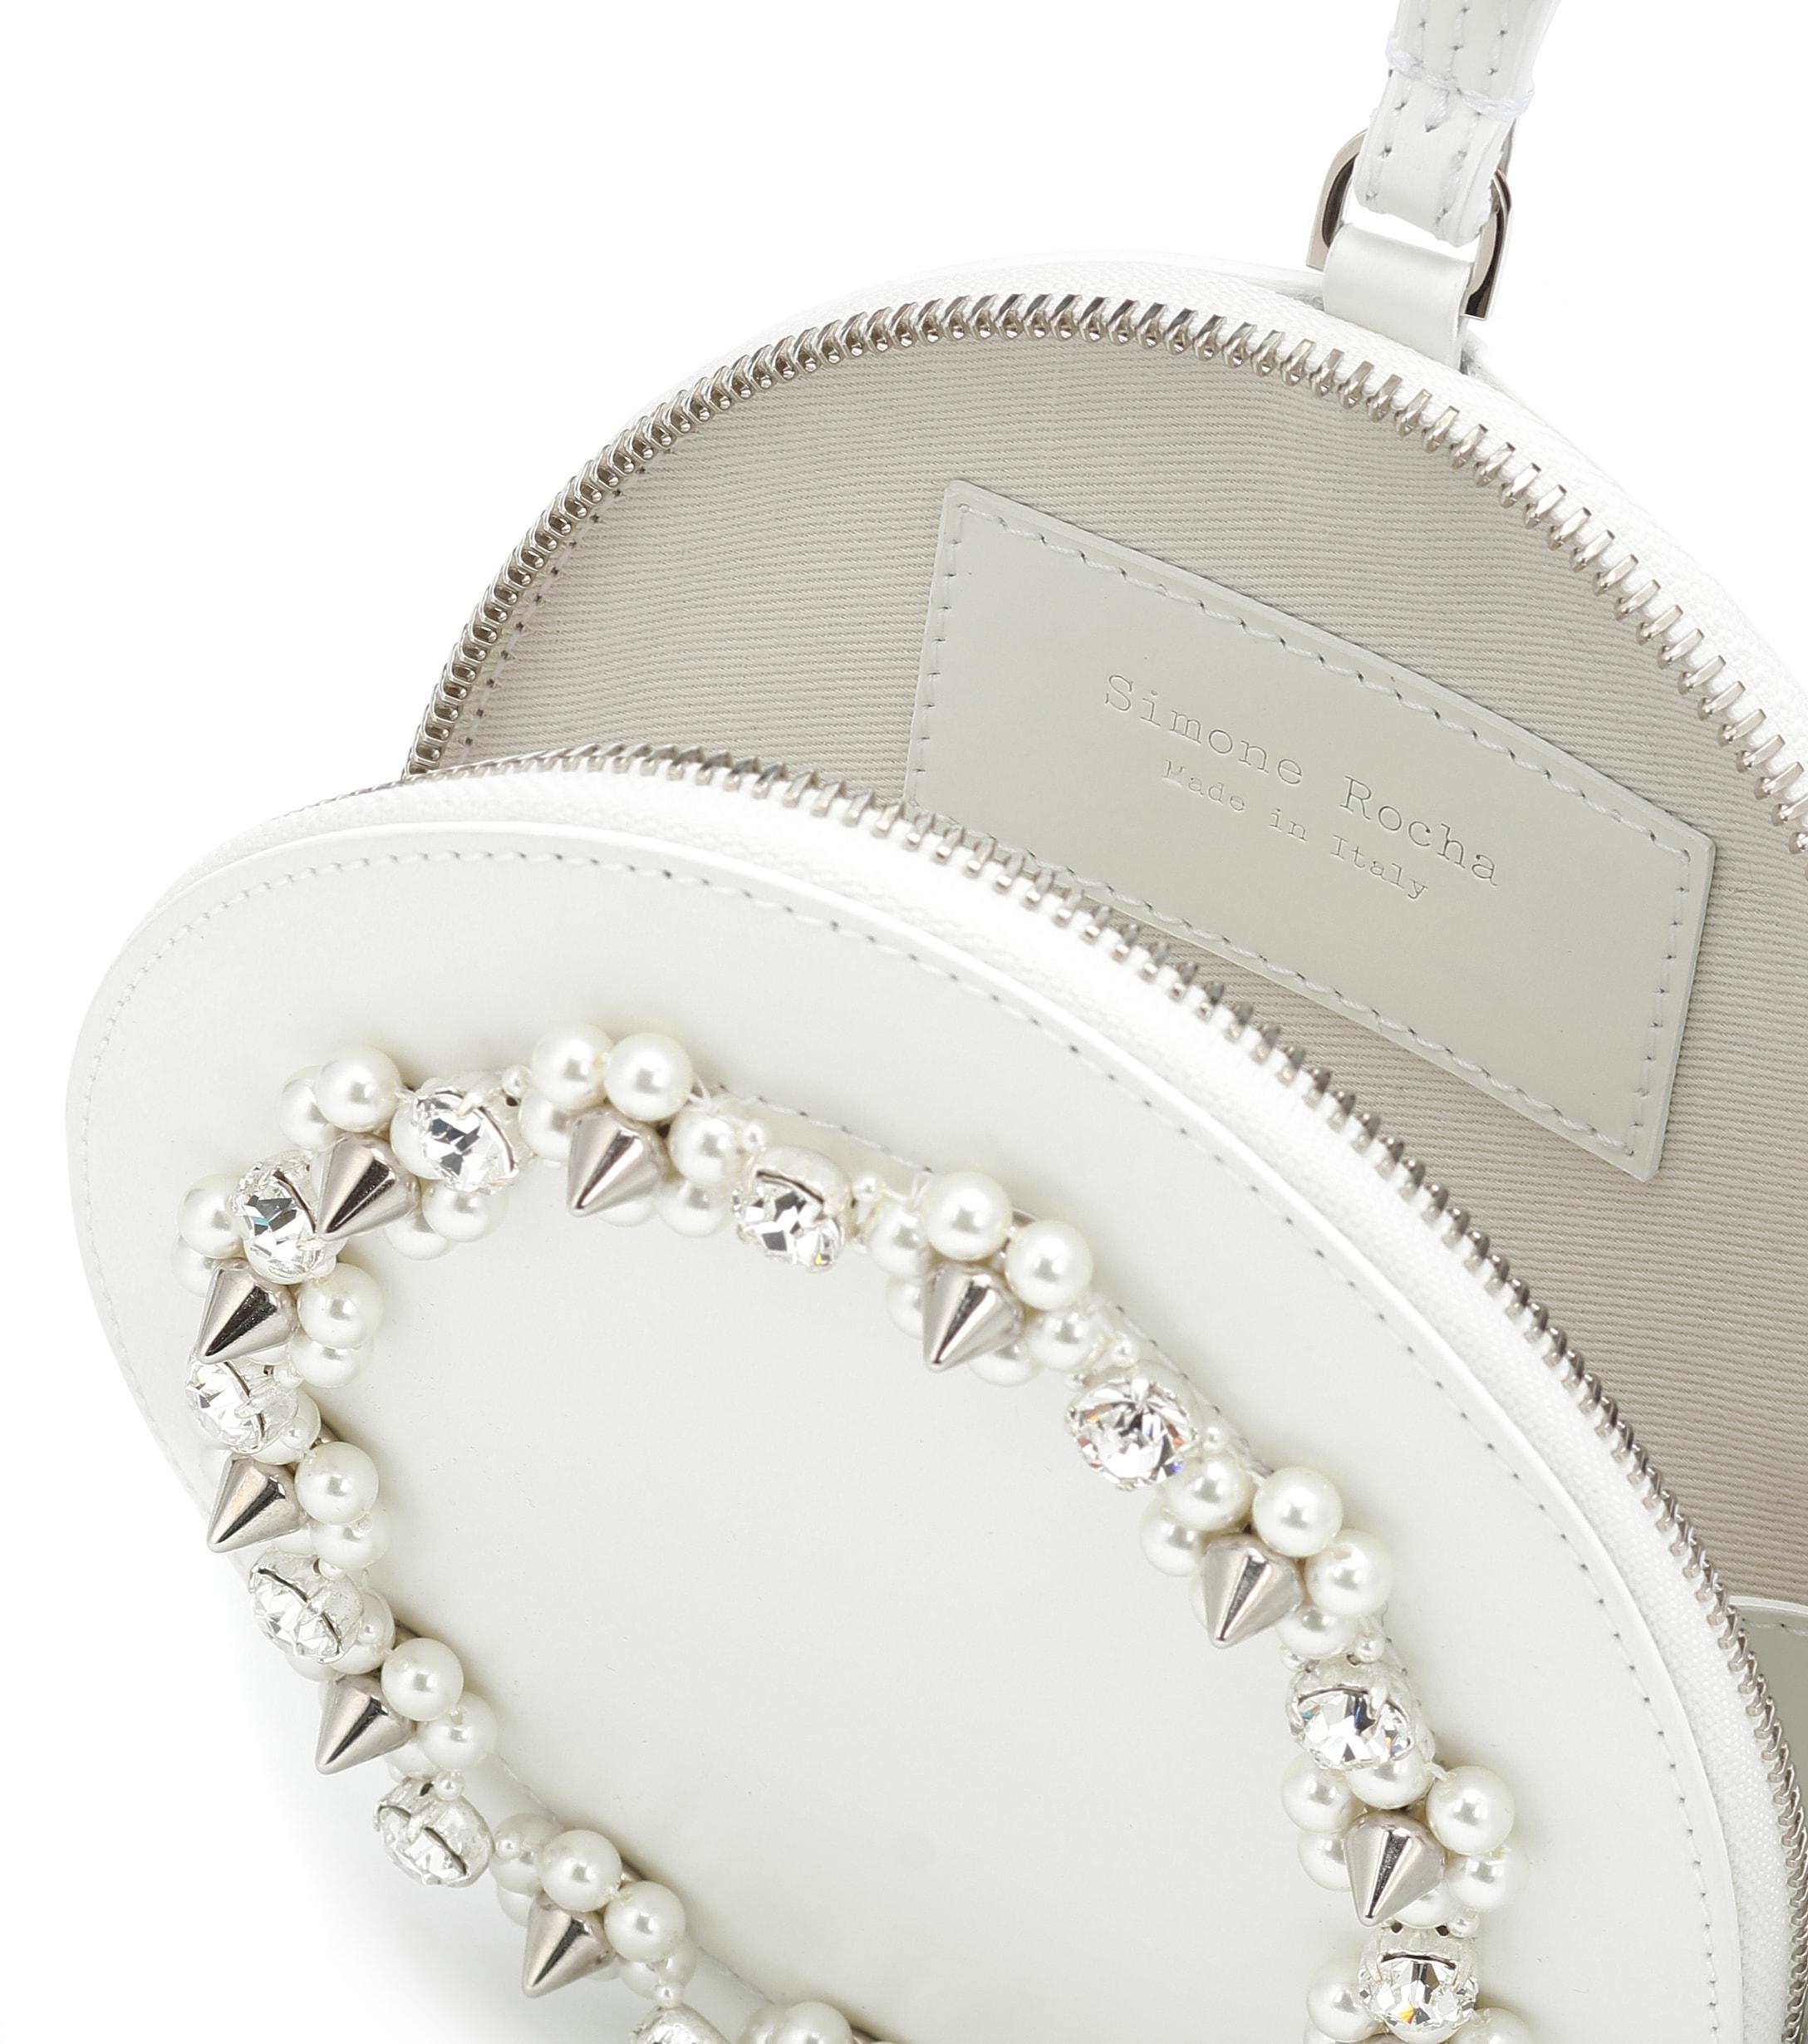 Simone Rocha Embellished Leather Clutch in White - Lyst